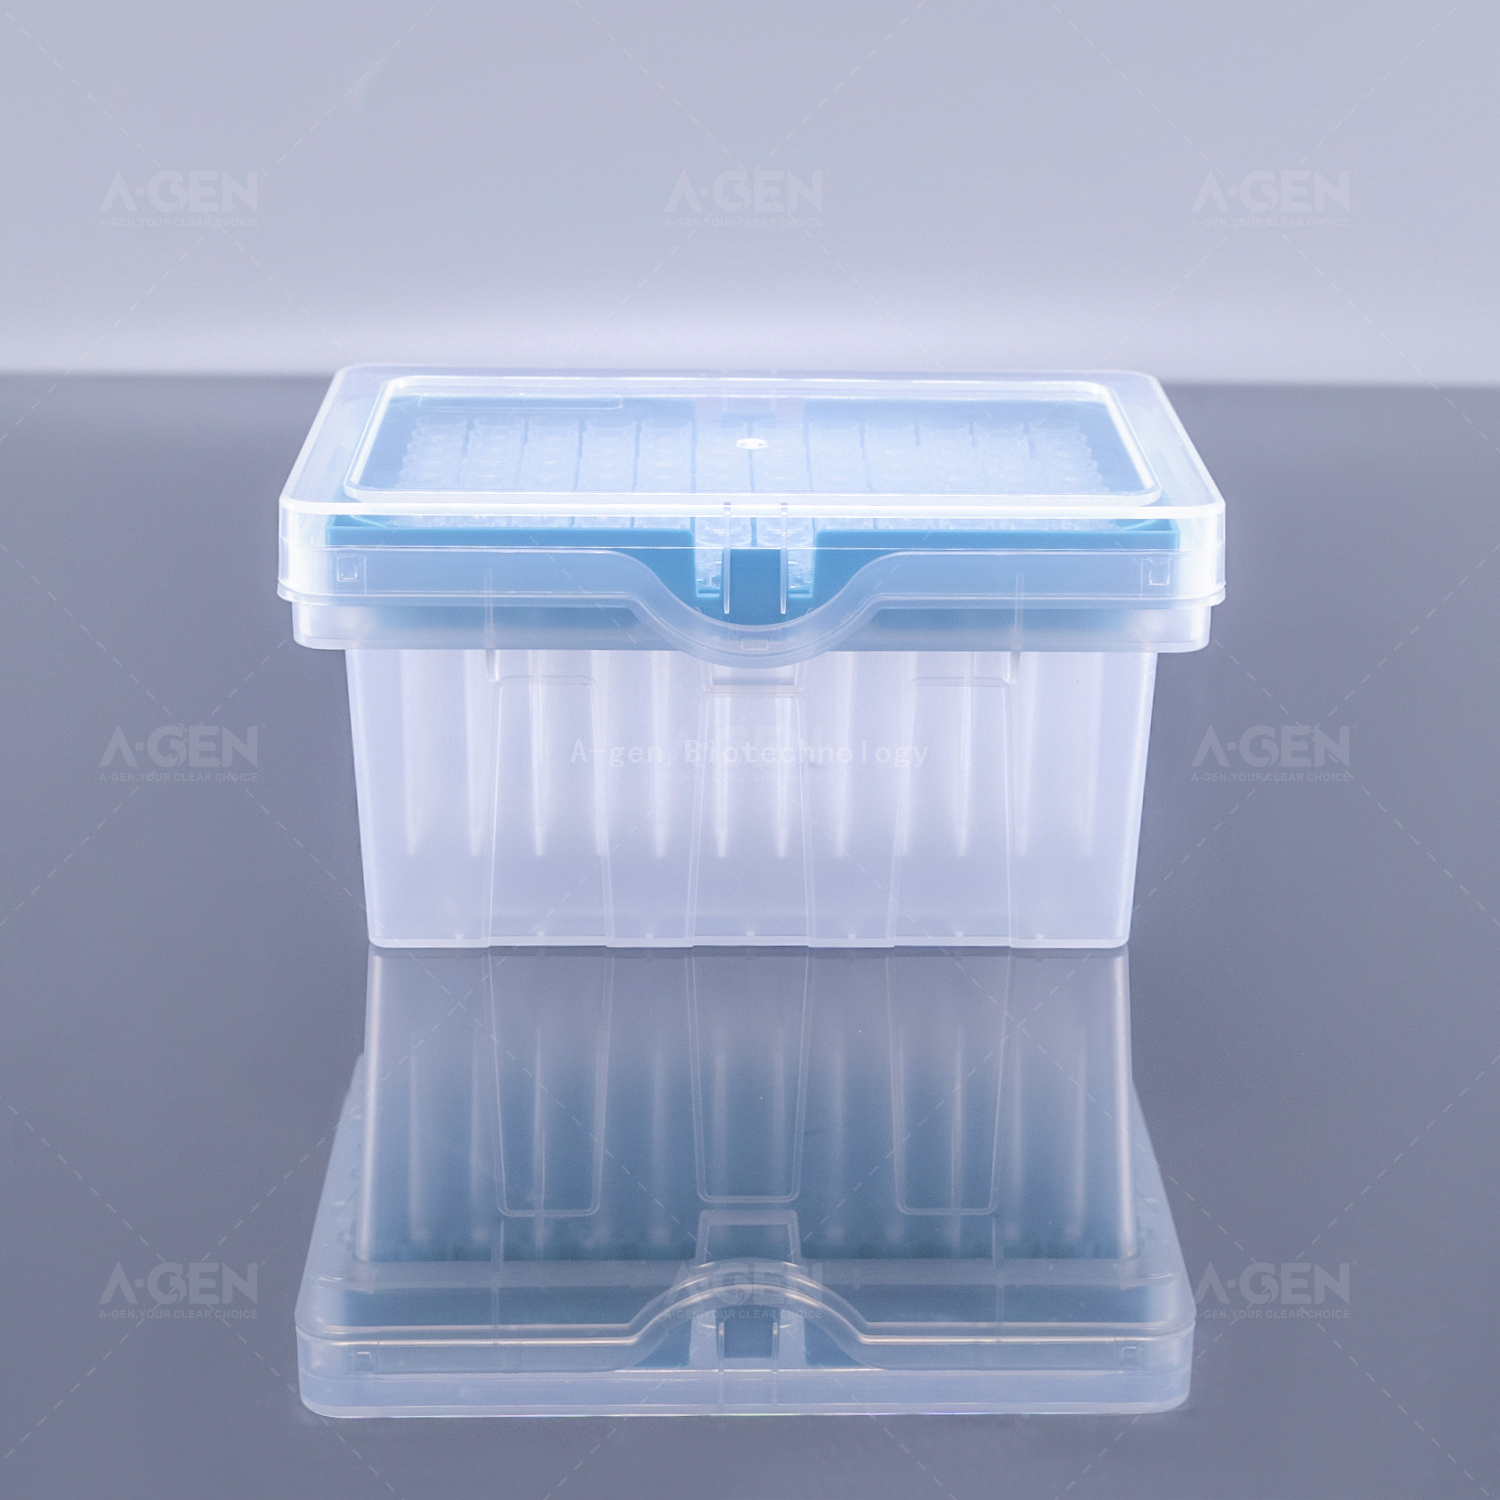 Hamilton Pipette Tip 50μL Sterile Clear PP Pipette Tip in Rack for Liquid Transfer With Filter 